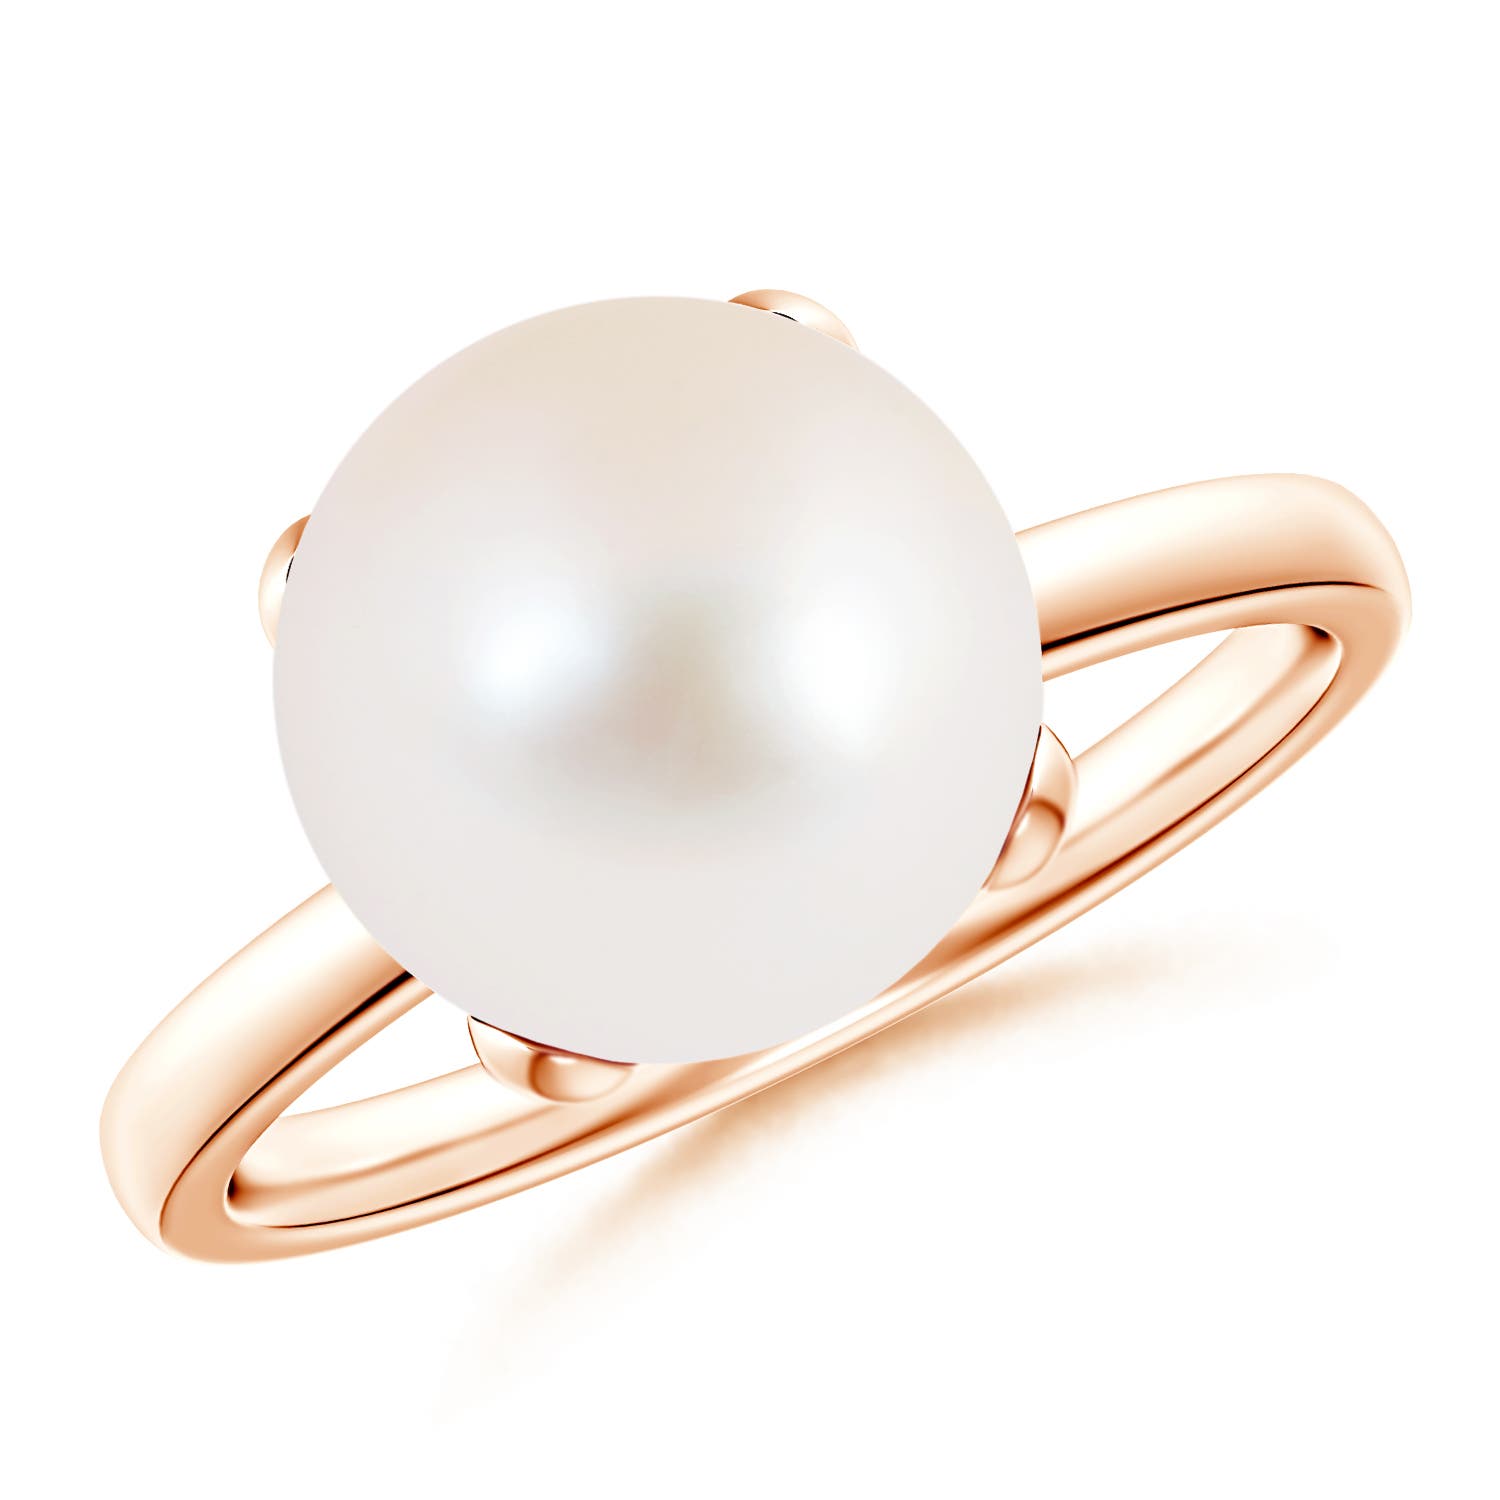 AAA / 7.2 CT / 14 KT Rose Gold